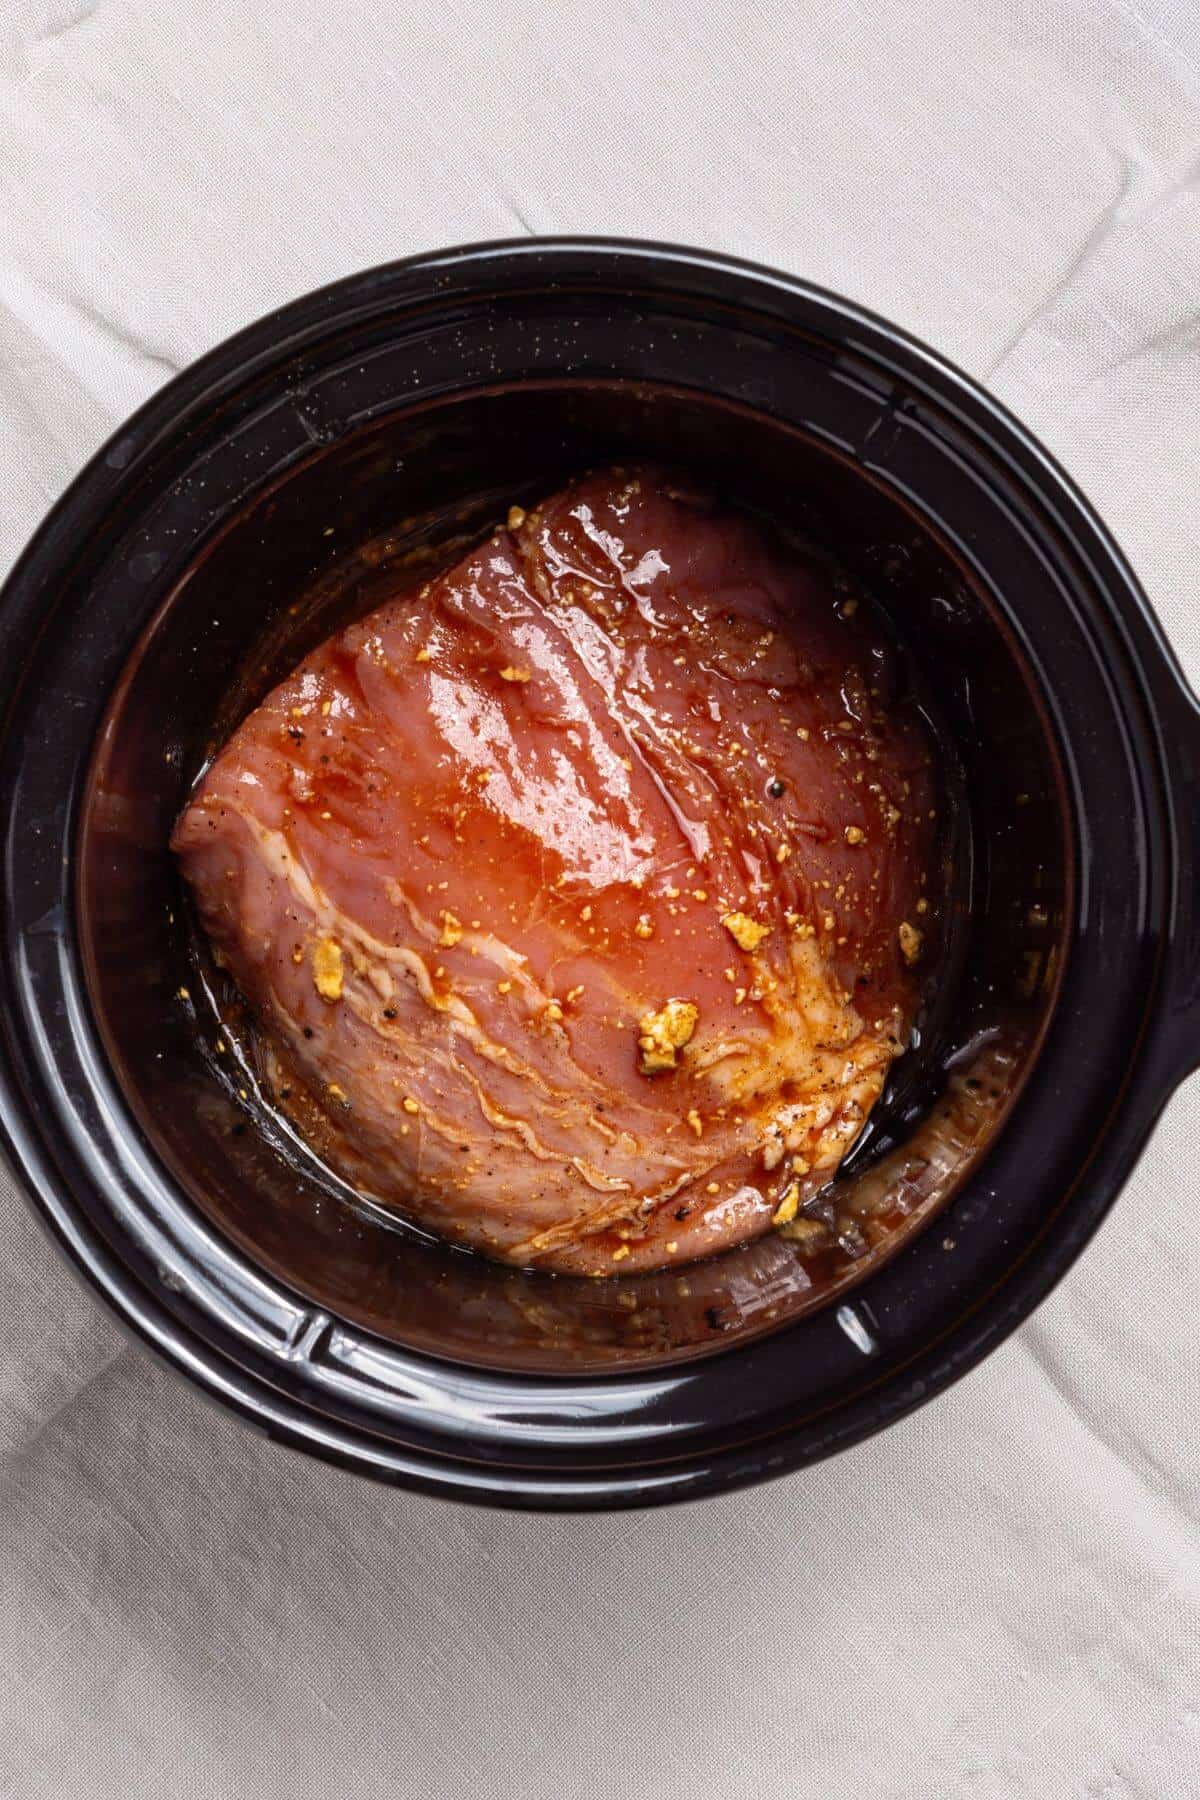 Sauce poured over pork loin in a slow cooker on a white cloth.